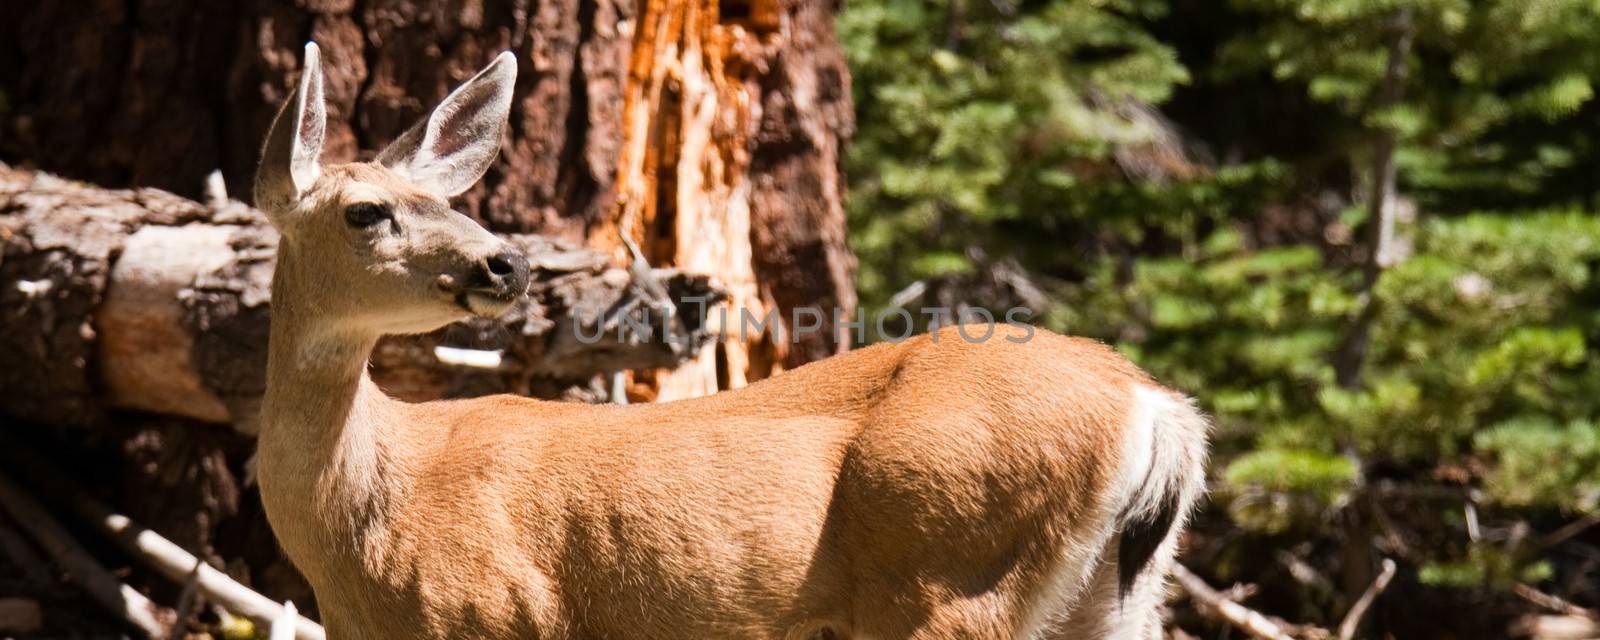 Deer in a forest, Taft Point, Yosemite National Park, California, USA